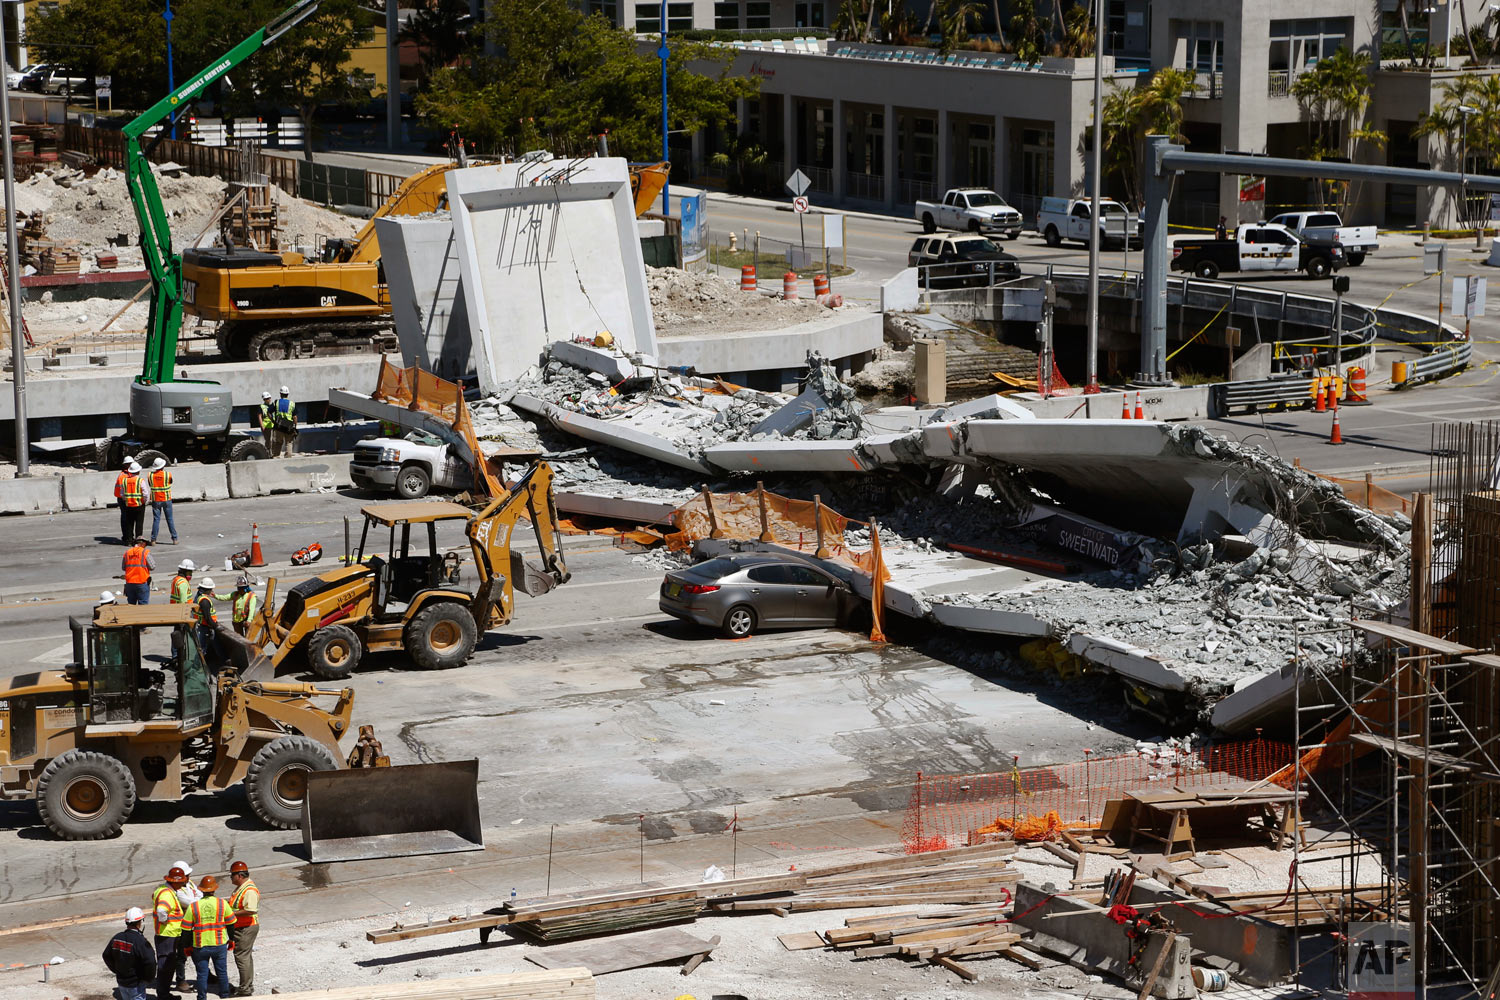  Crushed cars lie under a section of a collapsed pedestrian bridge near Florida International University in the Miami area on Friday, March 16, 2018. The bridge that was under construction collapsed onto a busy highway Thursday afternoon, crushing ve